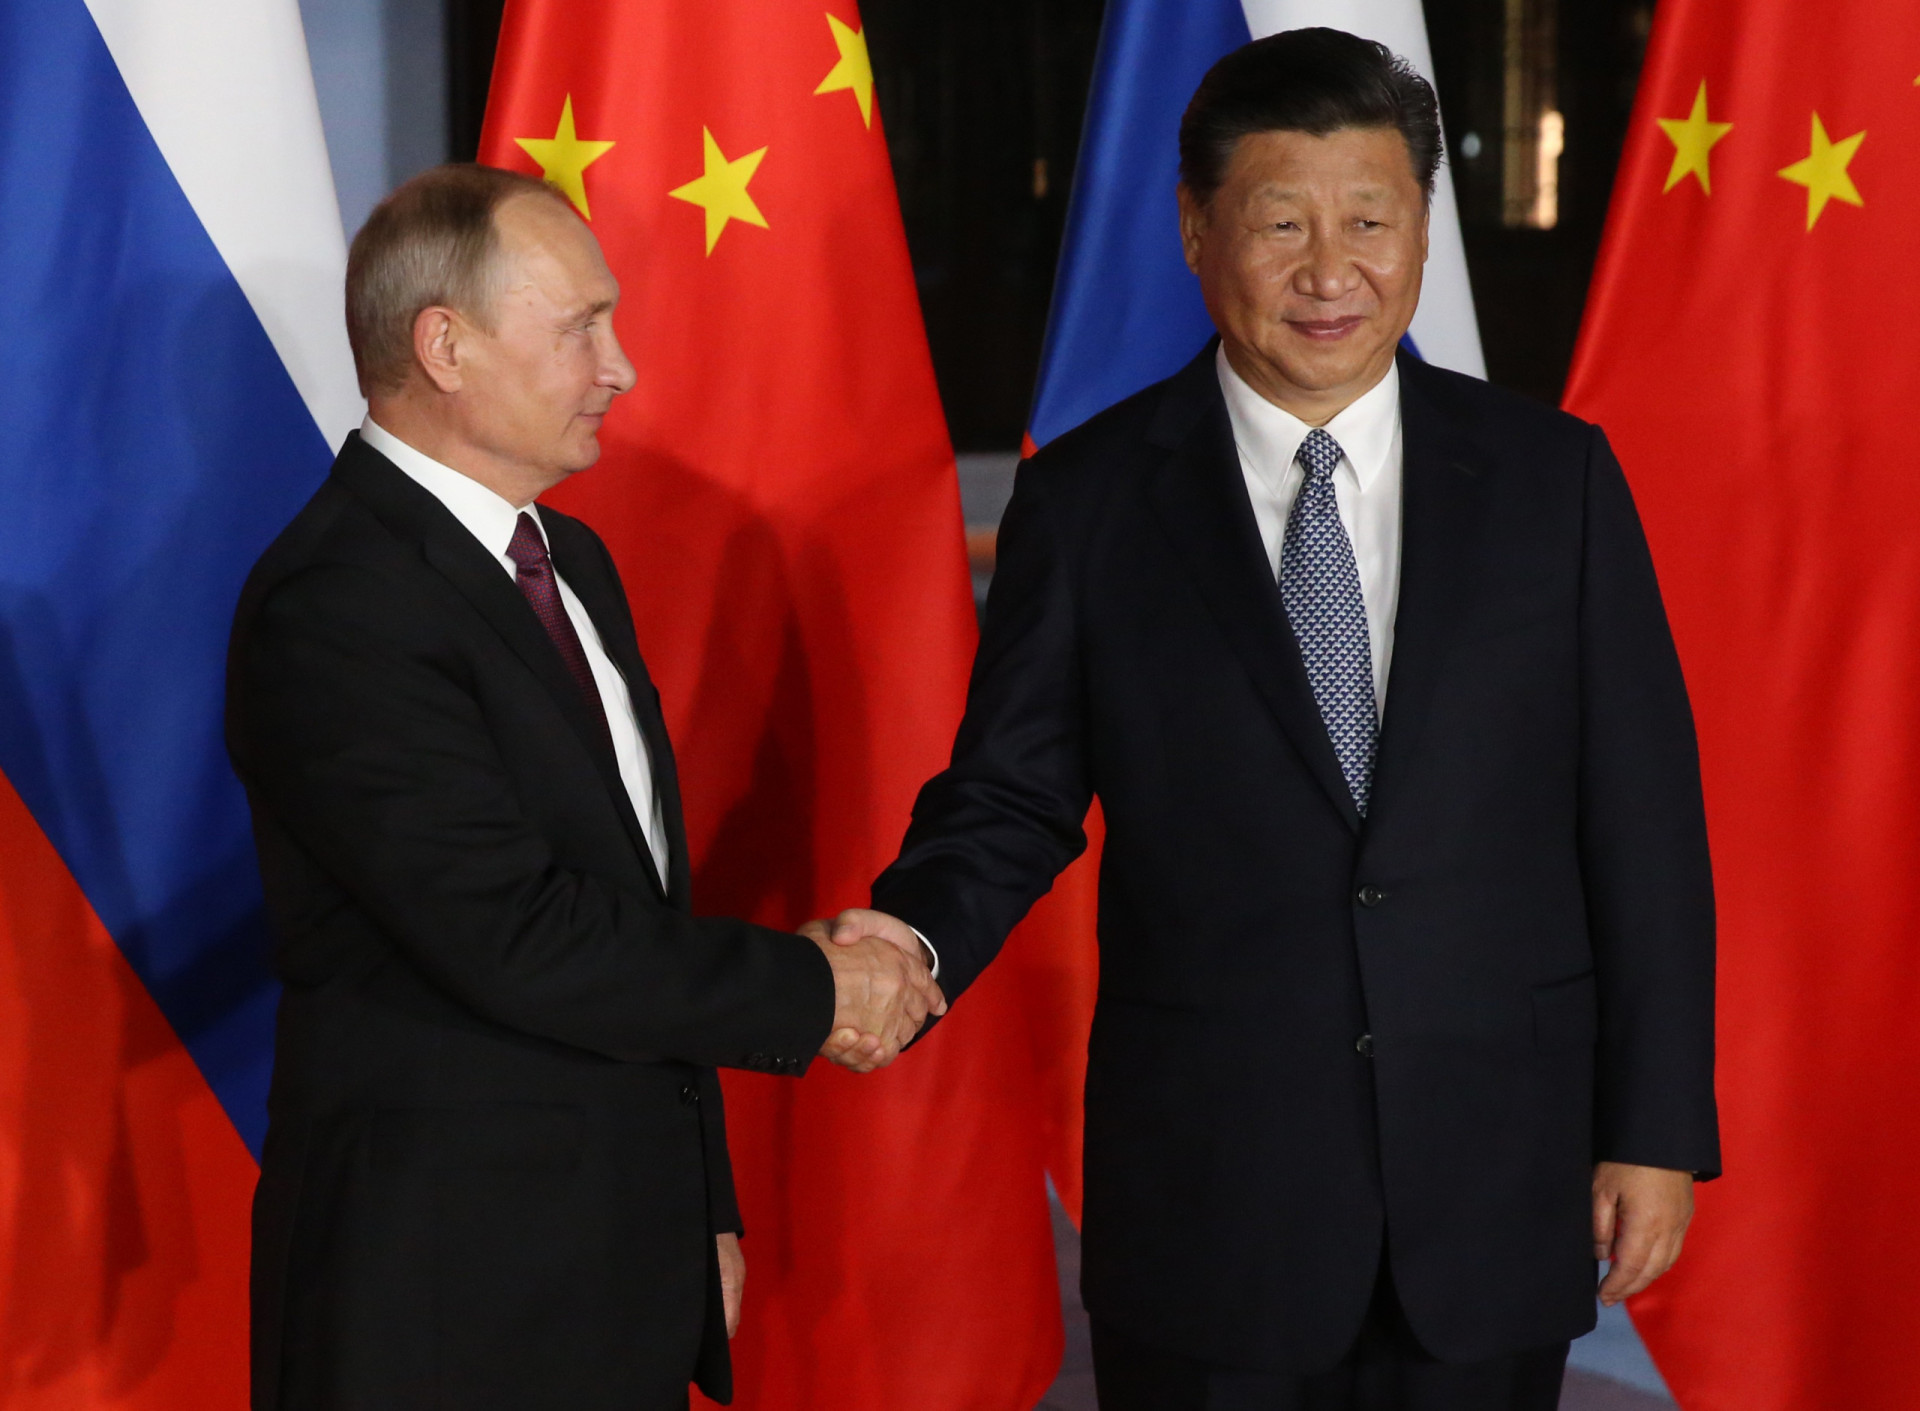 <p>Some have even interpreted this as a potential confrontation between China and NATO, which would suggest the dawn of a new Chinese-Russian pact.</p><p><a href="https://www.msn.com/en-us/community/channel/vid-7xx8mnucu55yw63we9va2gwr7uihbxwc68fxqp25x6tg4ftibpra?cvid=94631541bc0f4f89bfd59158d696ad7e">Follow us and access great exclusive content every day</a></p>